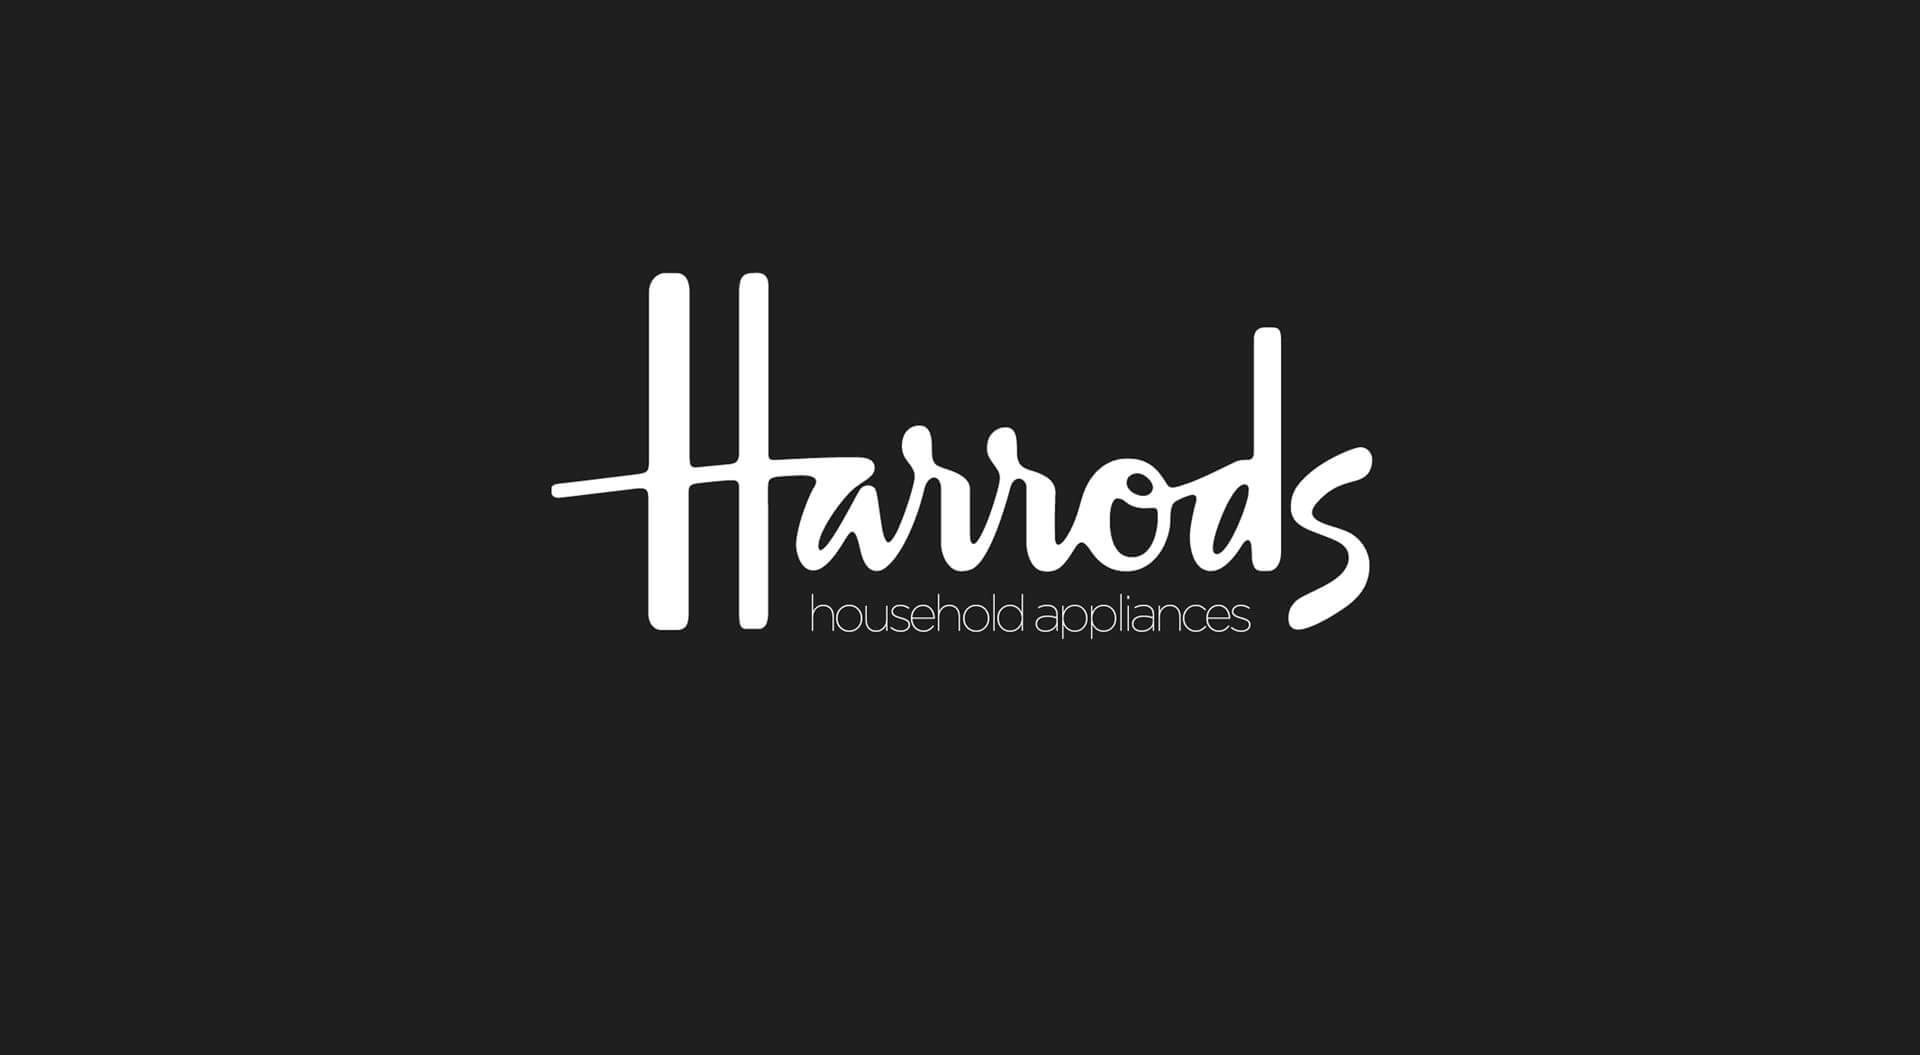 Harrods, household technology electrical department store branding